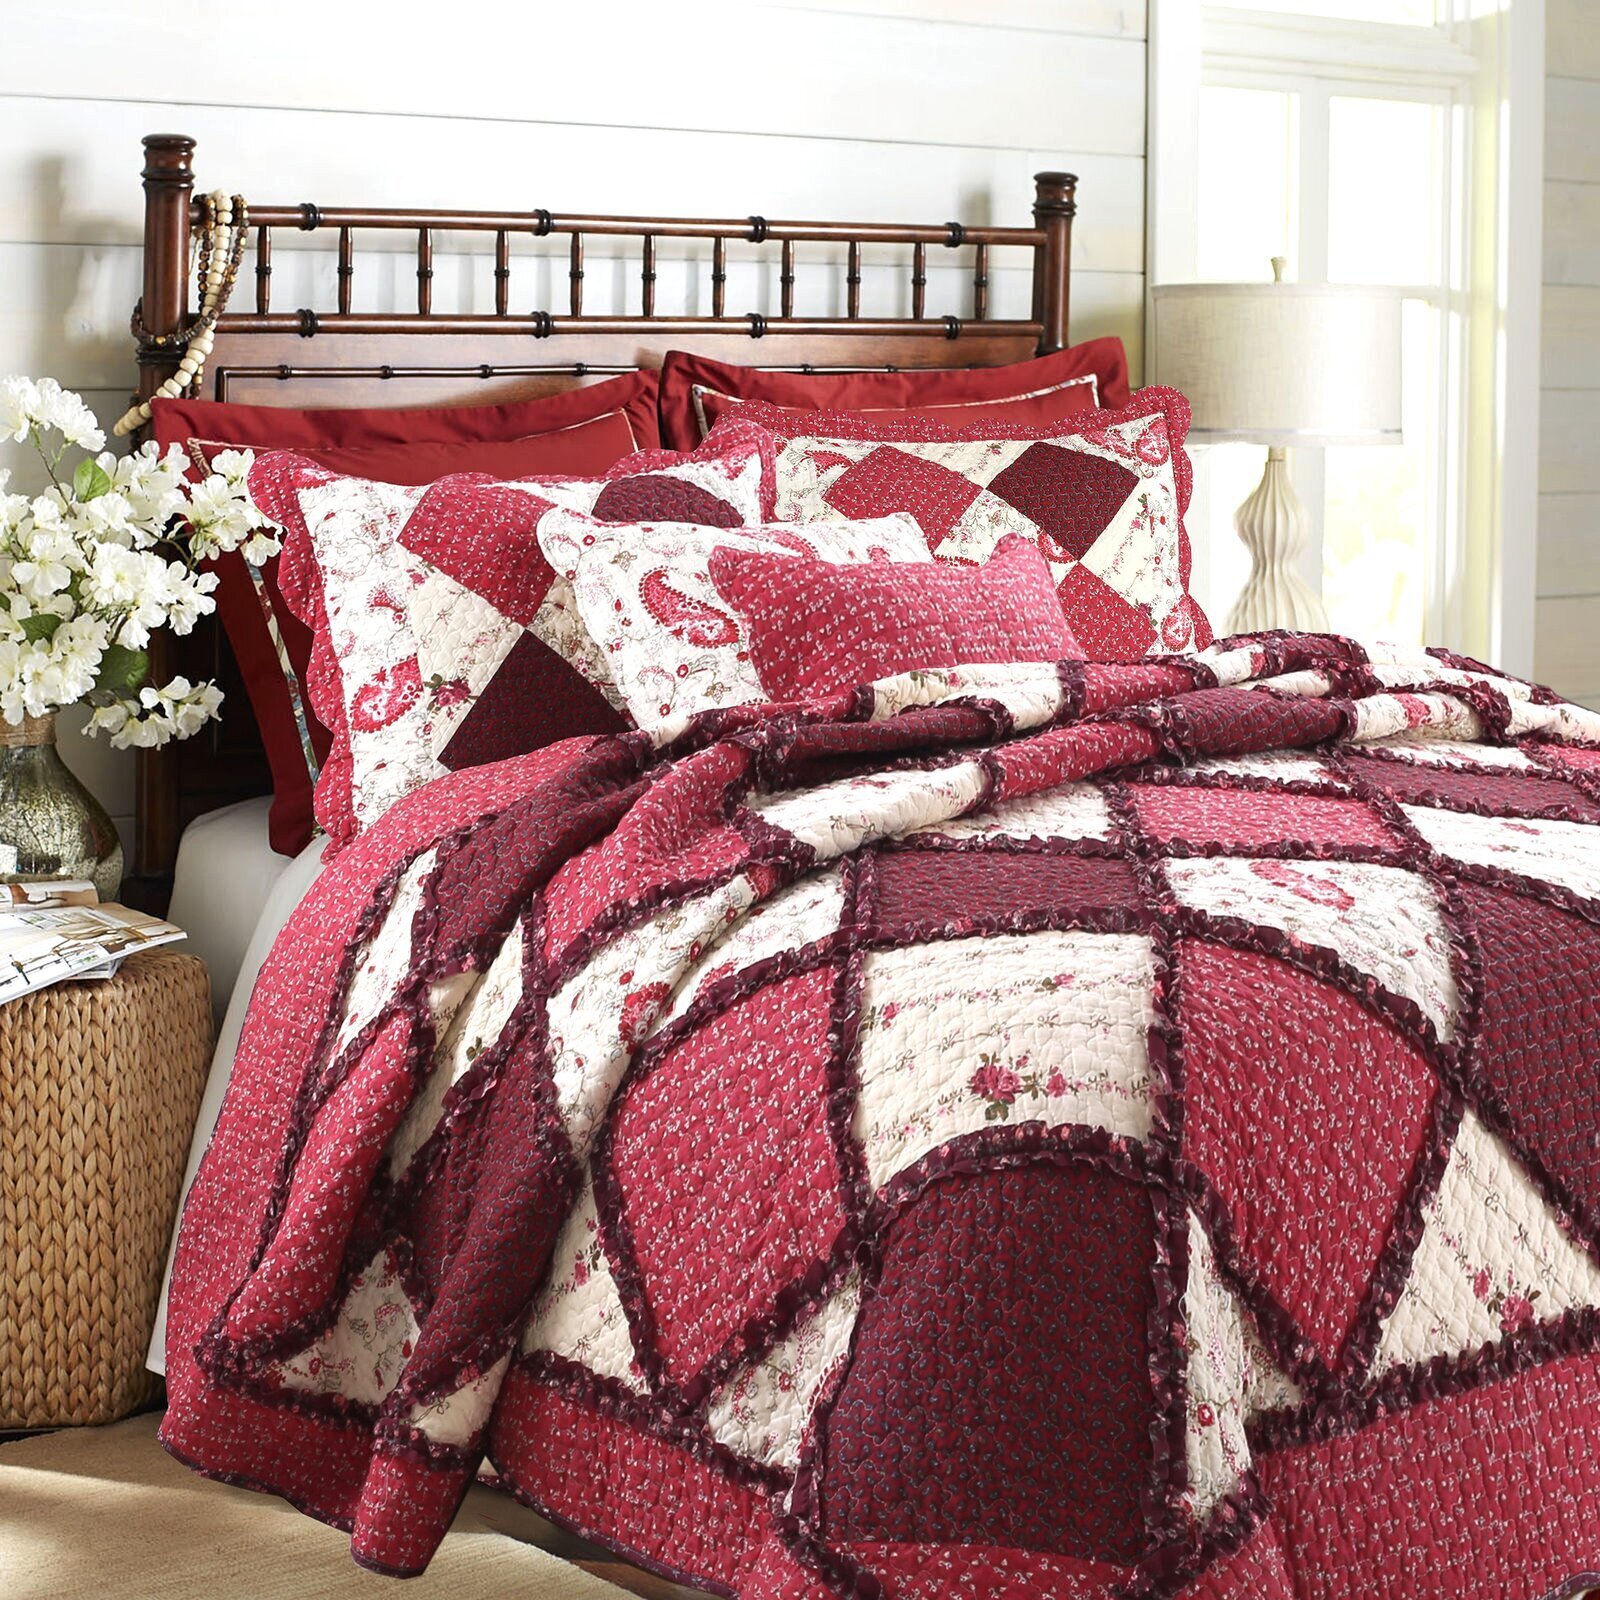 Antique patchwork bedding set with ruffles